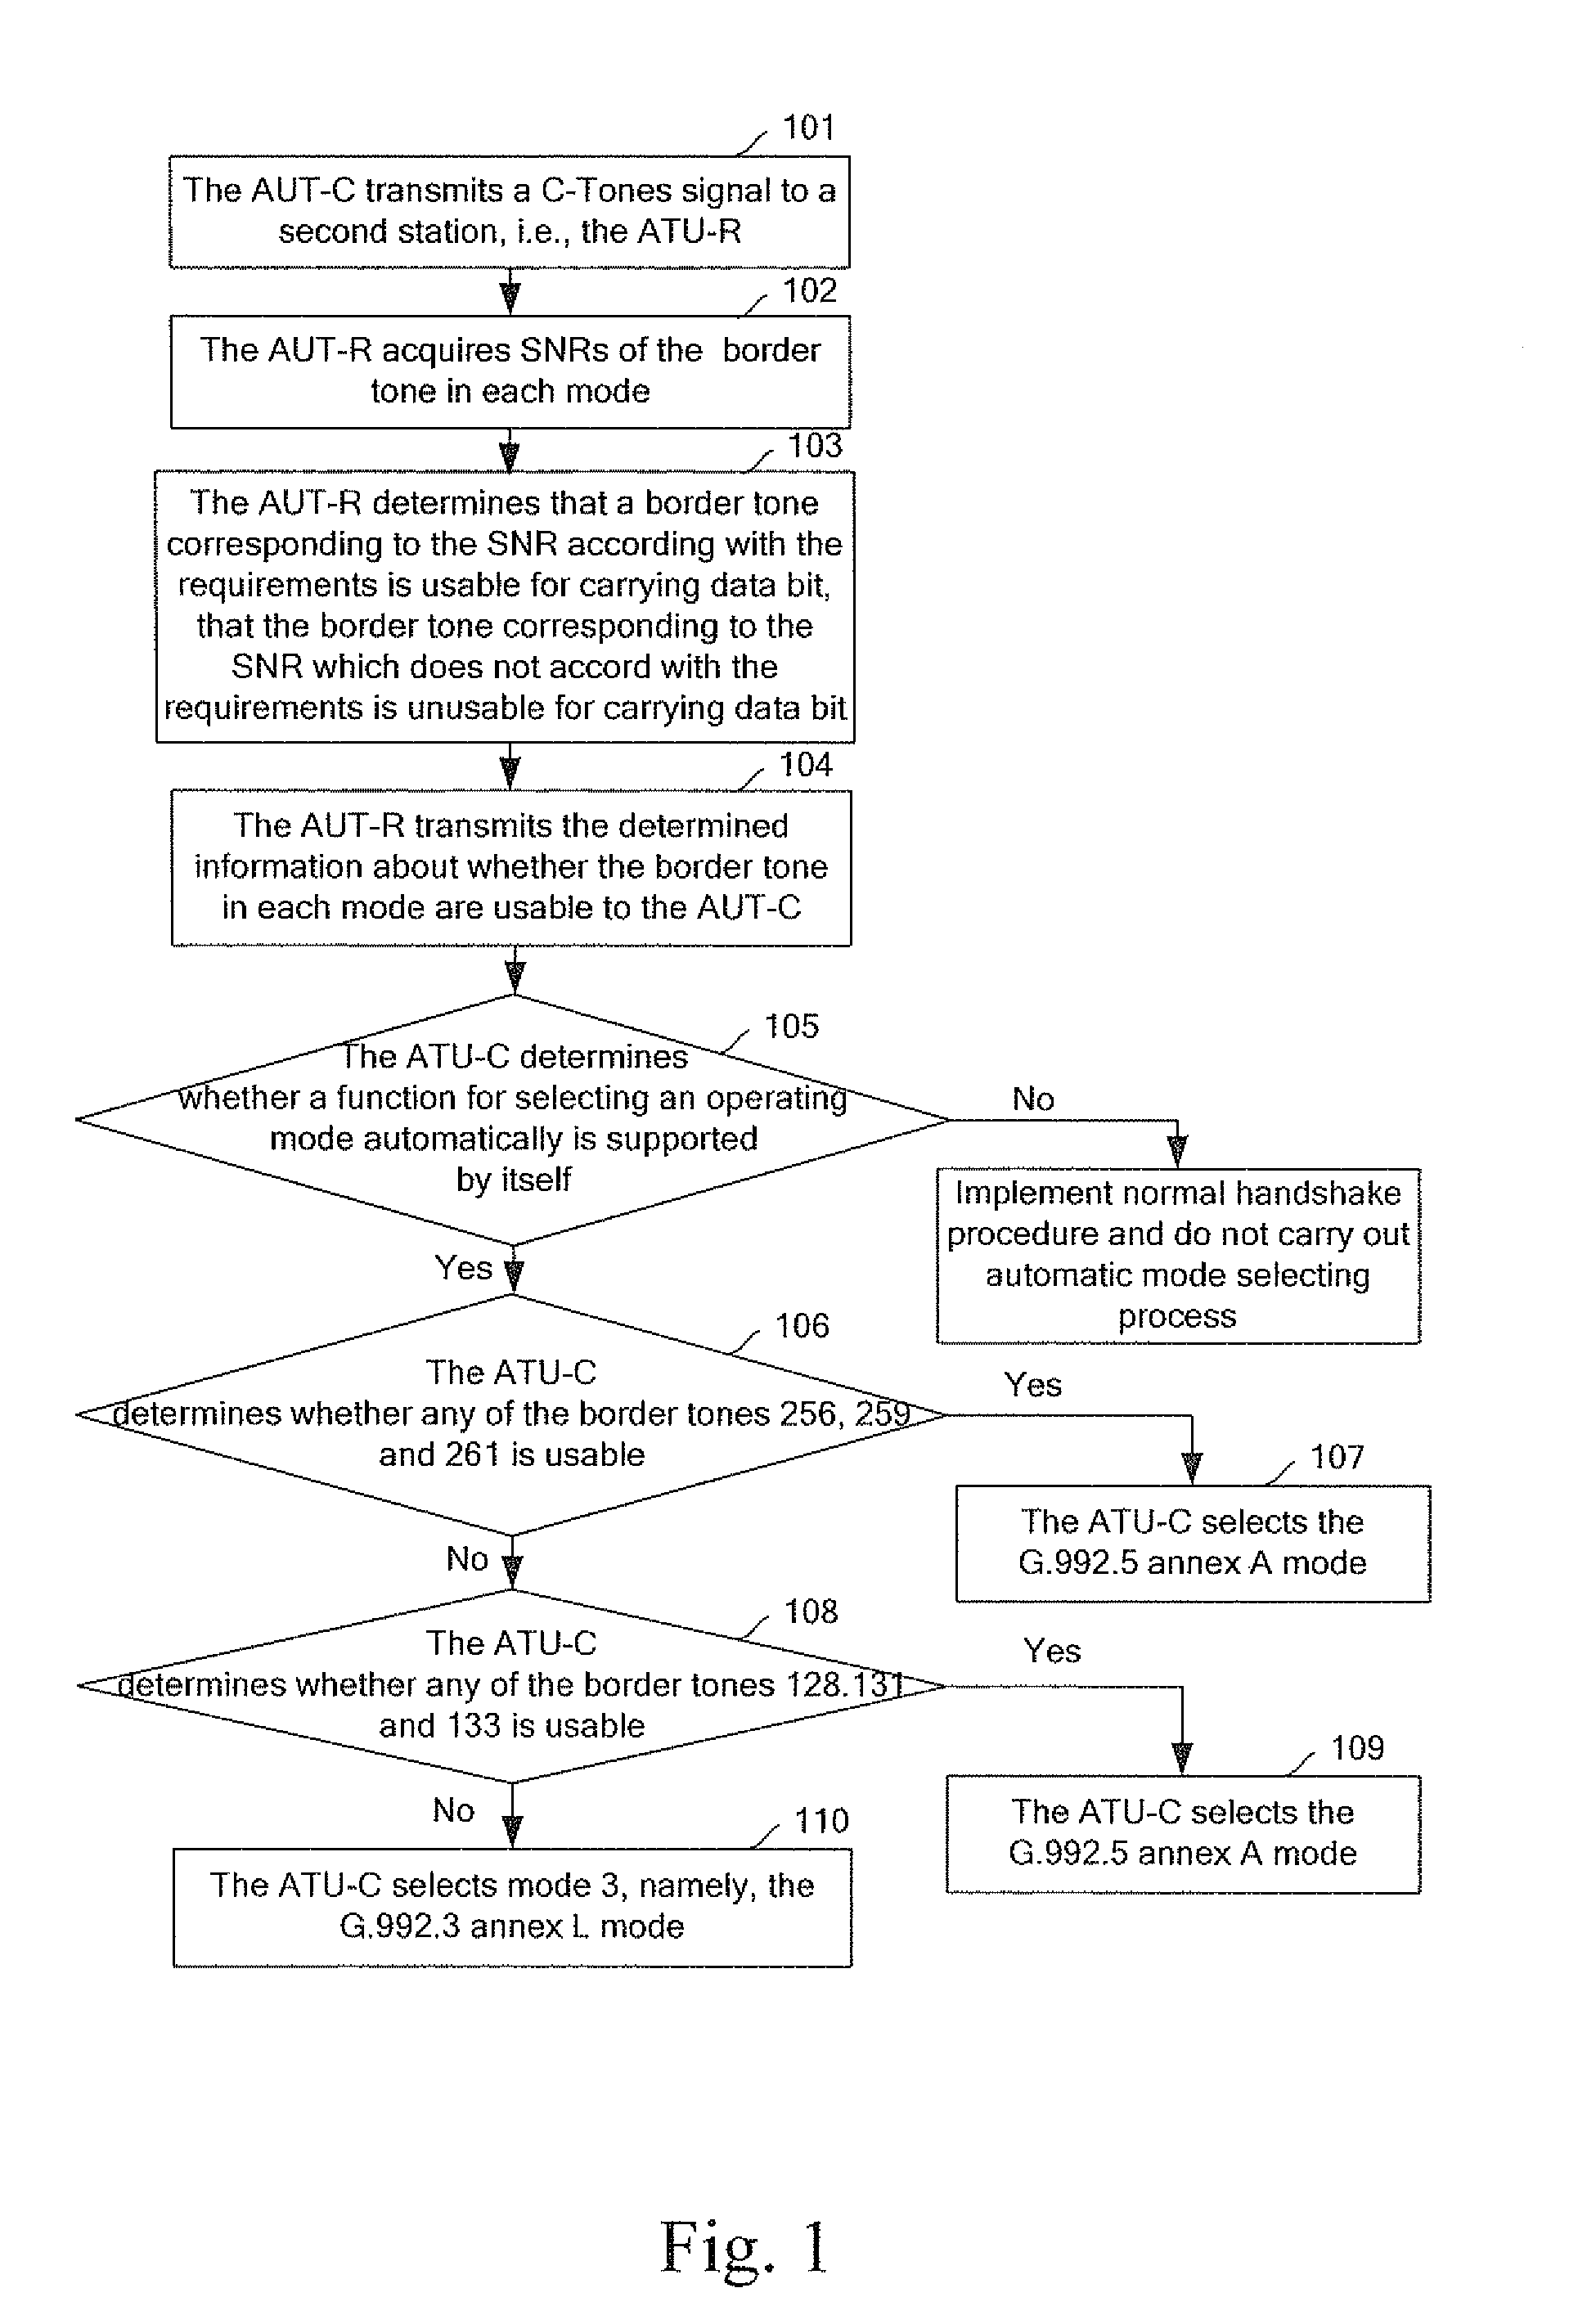 Method for selecting an operating mode automatically